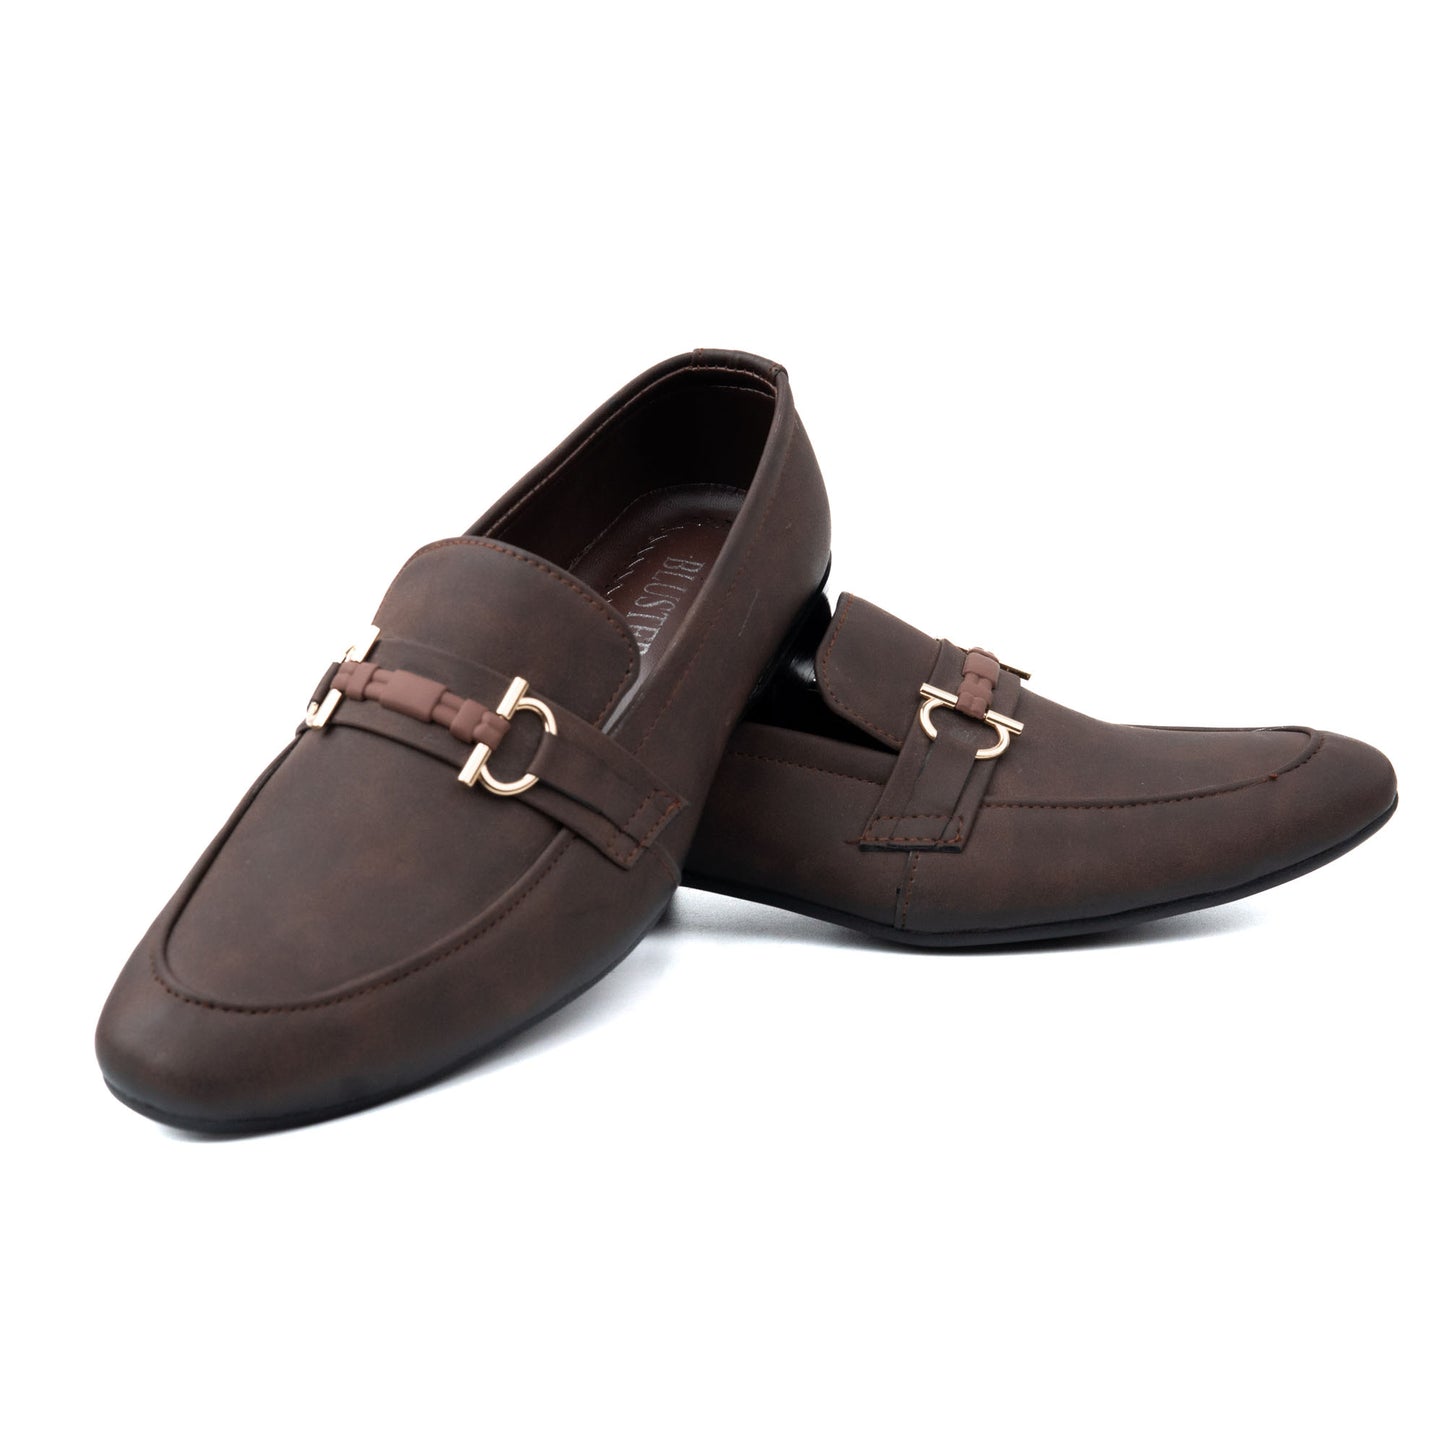 Strap Buckle Formal Shoes